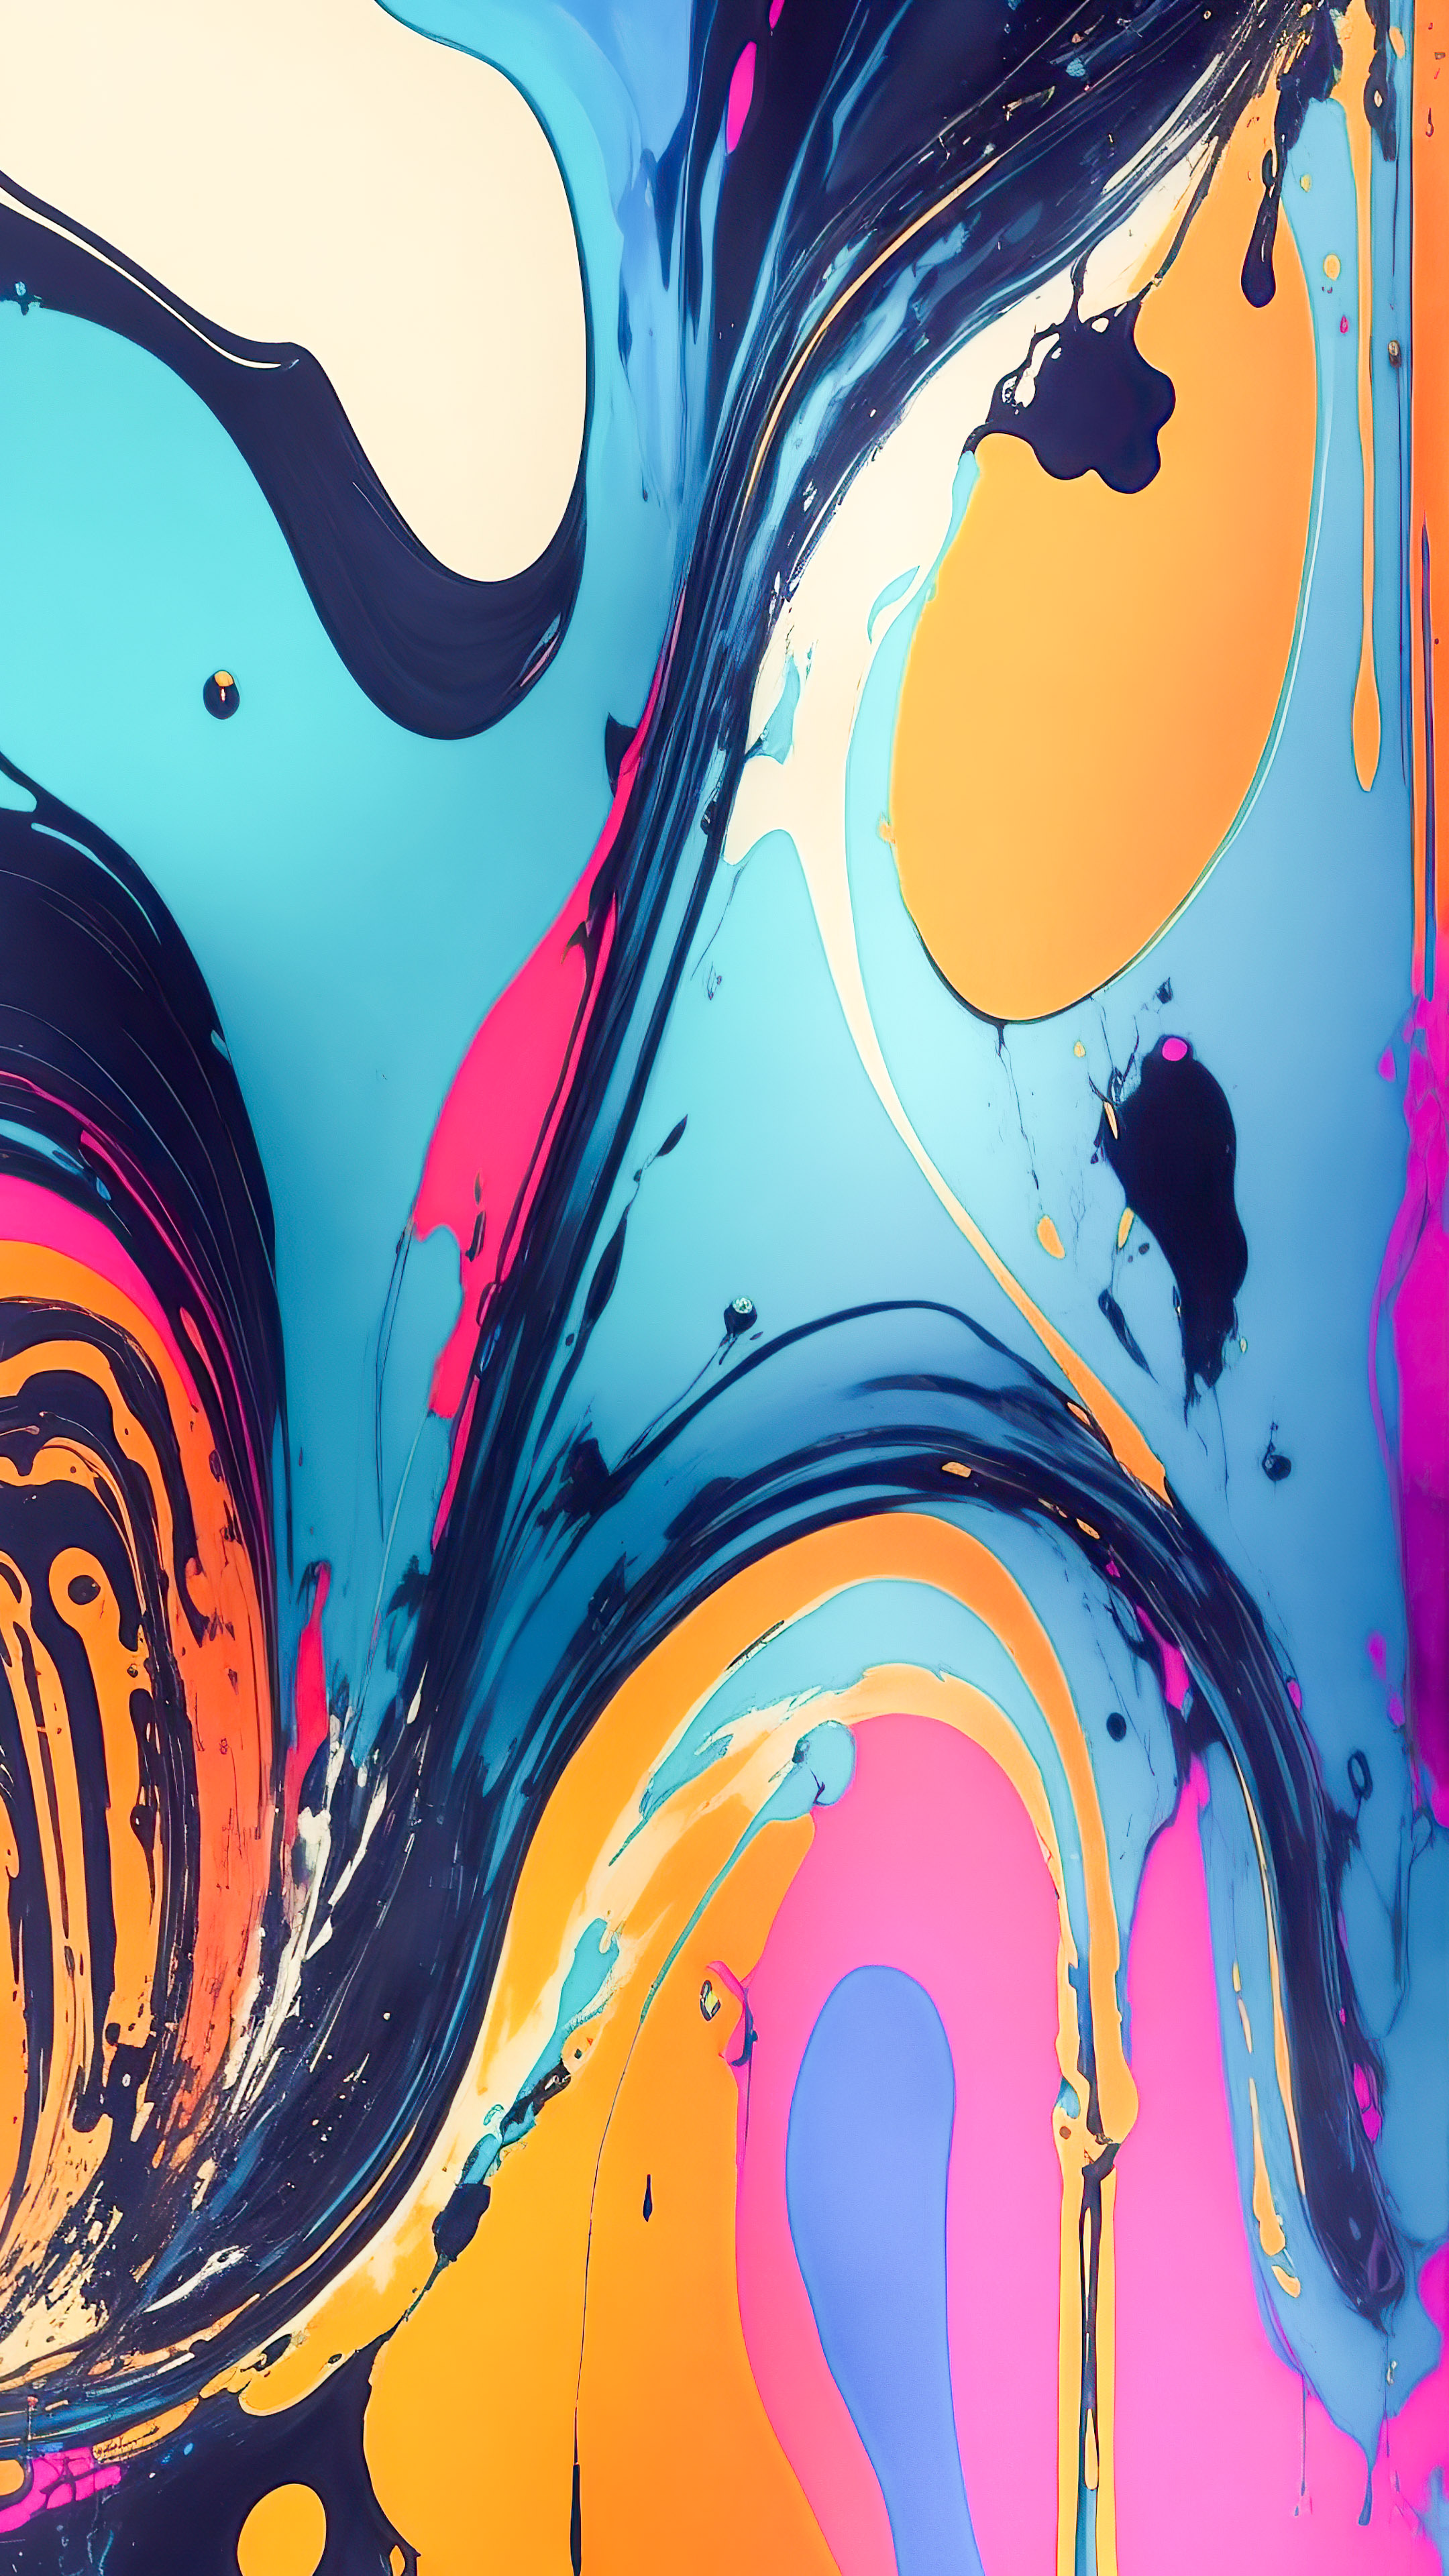 Experience the rhythmic chaos of paint drips on canvas with our iPhone ultra HD abstract wallpaper in 4K resolution.